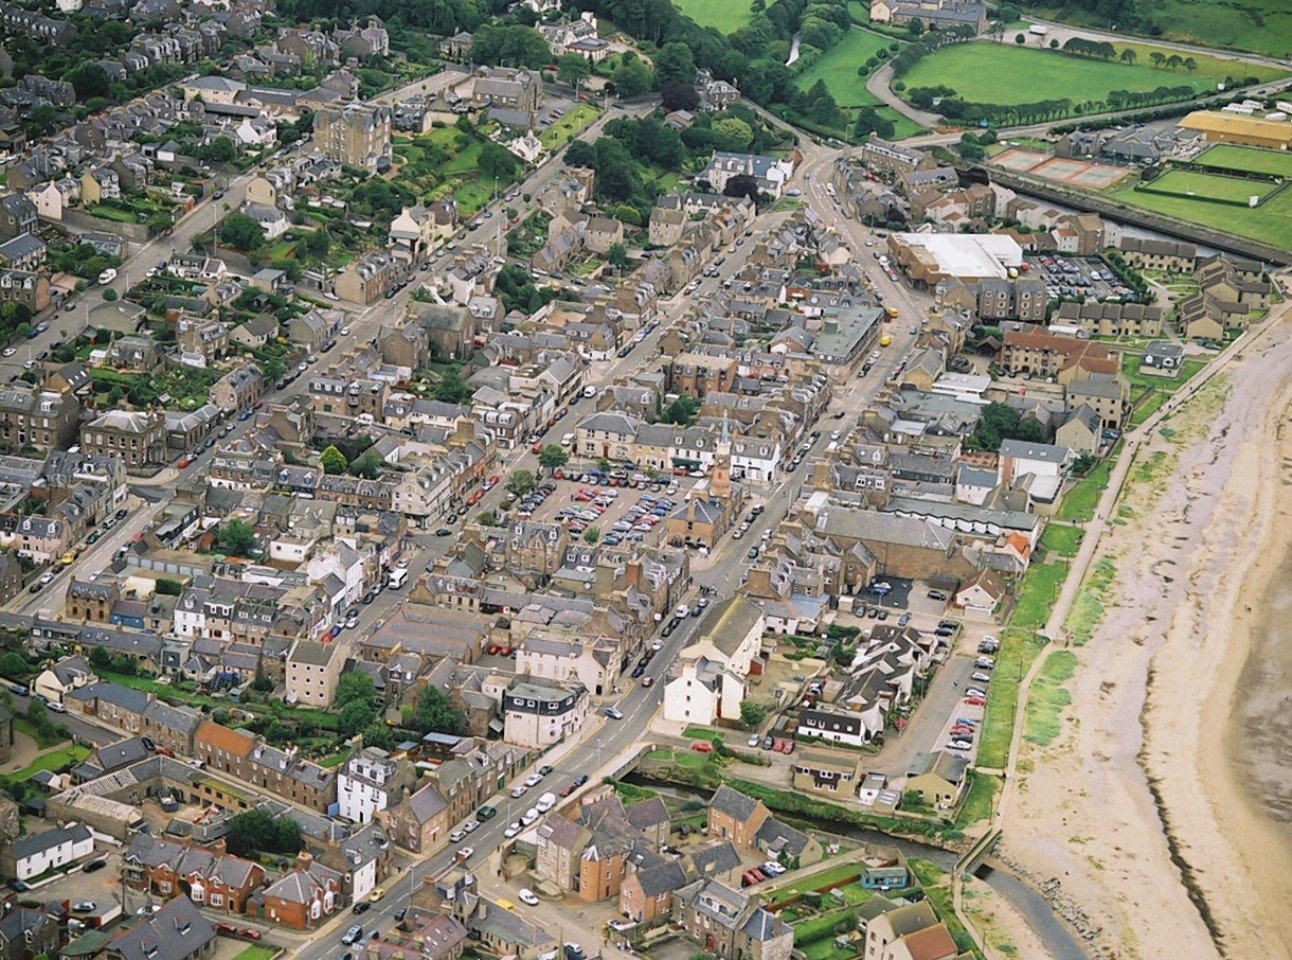 An aerial view of Stonehaven